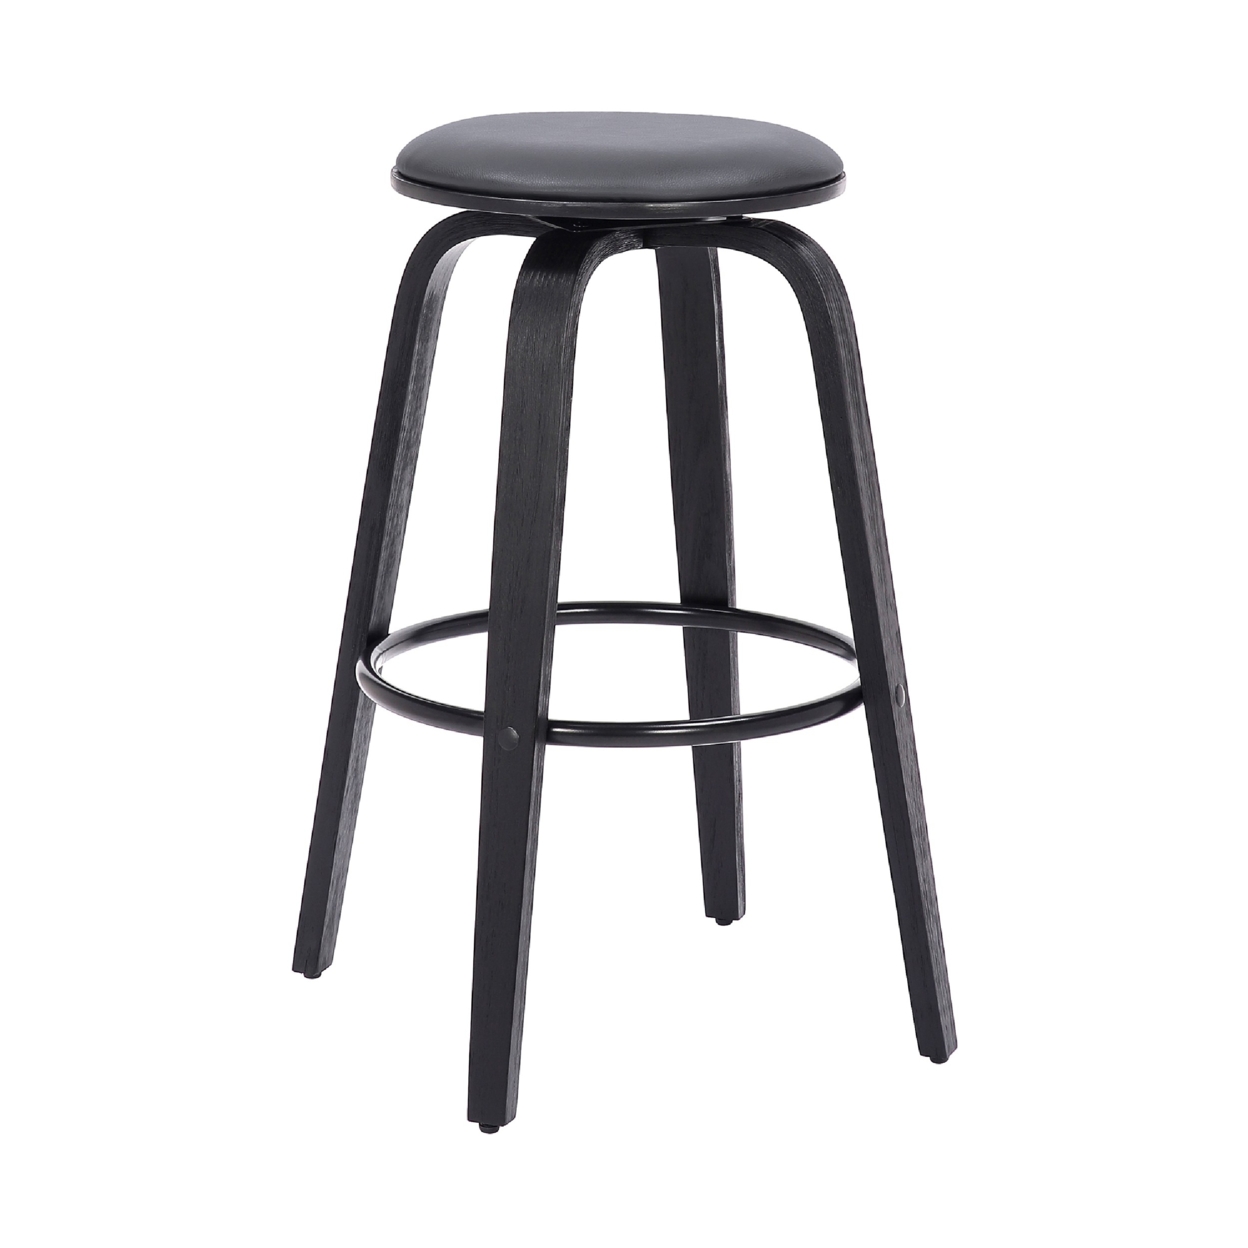 Backless Barstool With Swivel Seat And Wooden Legs, Gray- Saltoro Sherpi